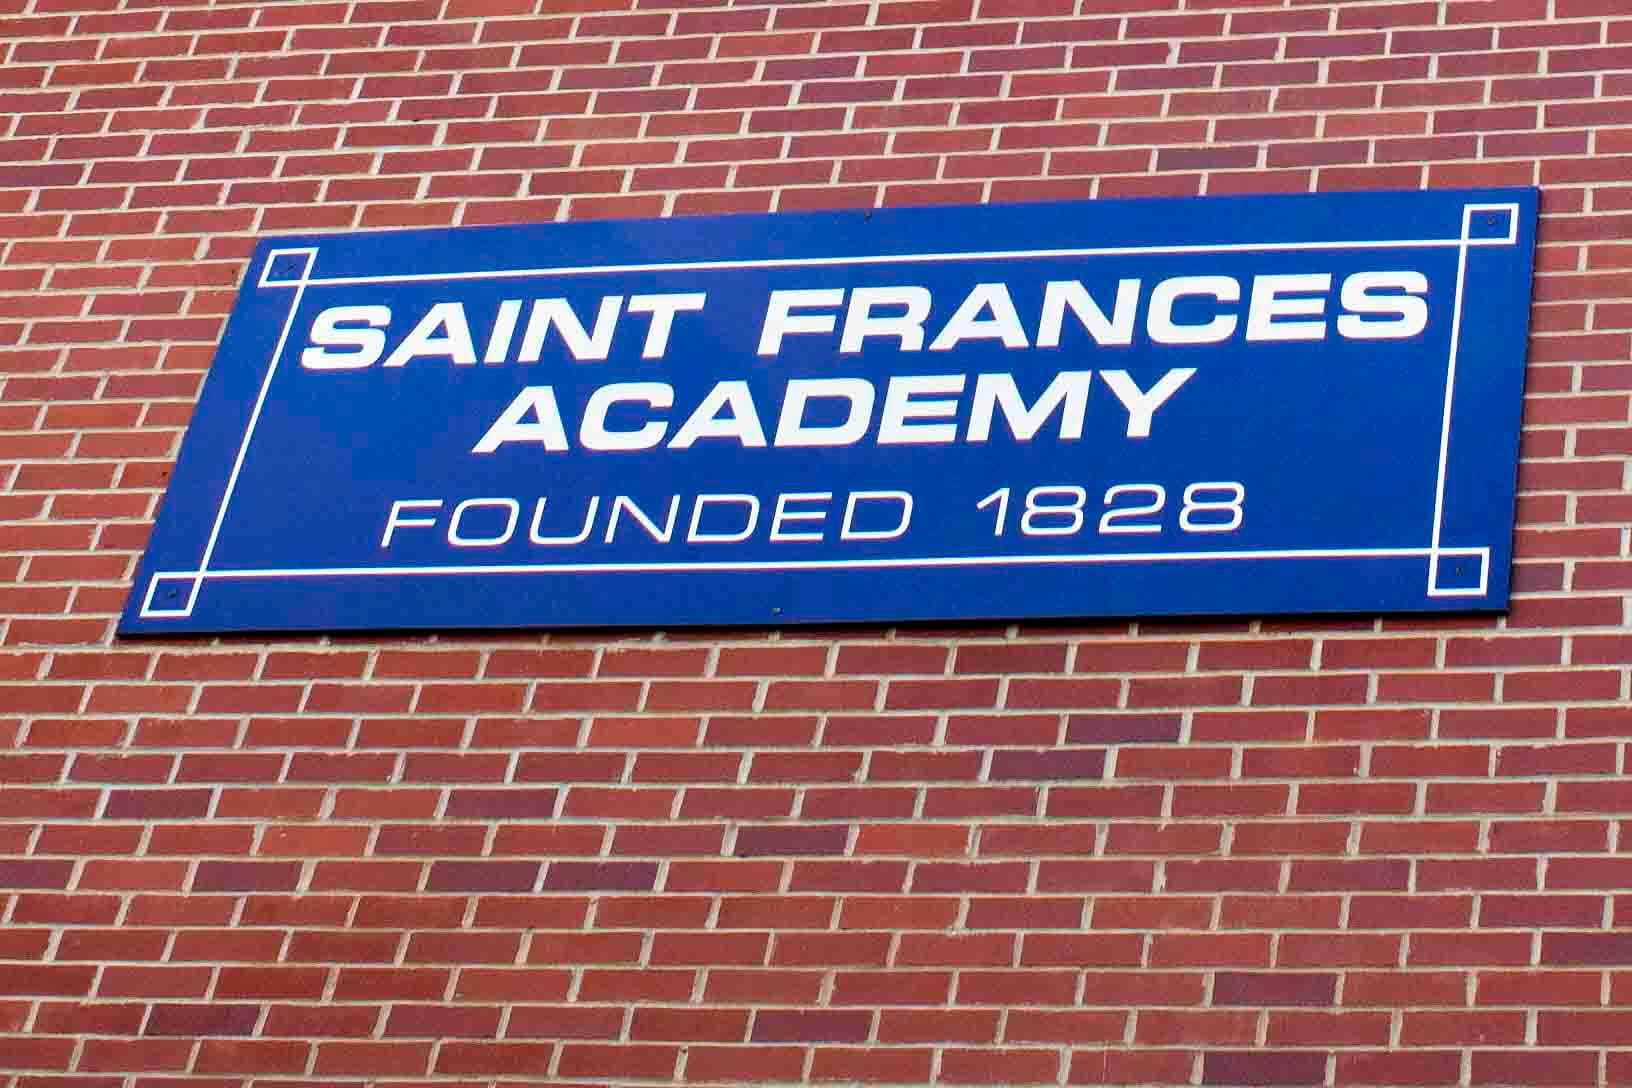 Former St. Frances Academy teacher accused of inappropriate relationship with student